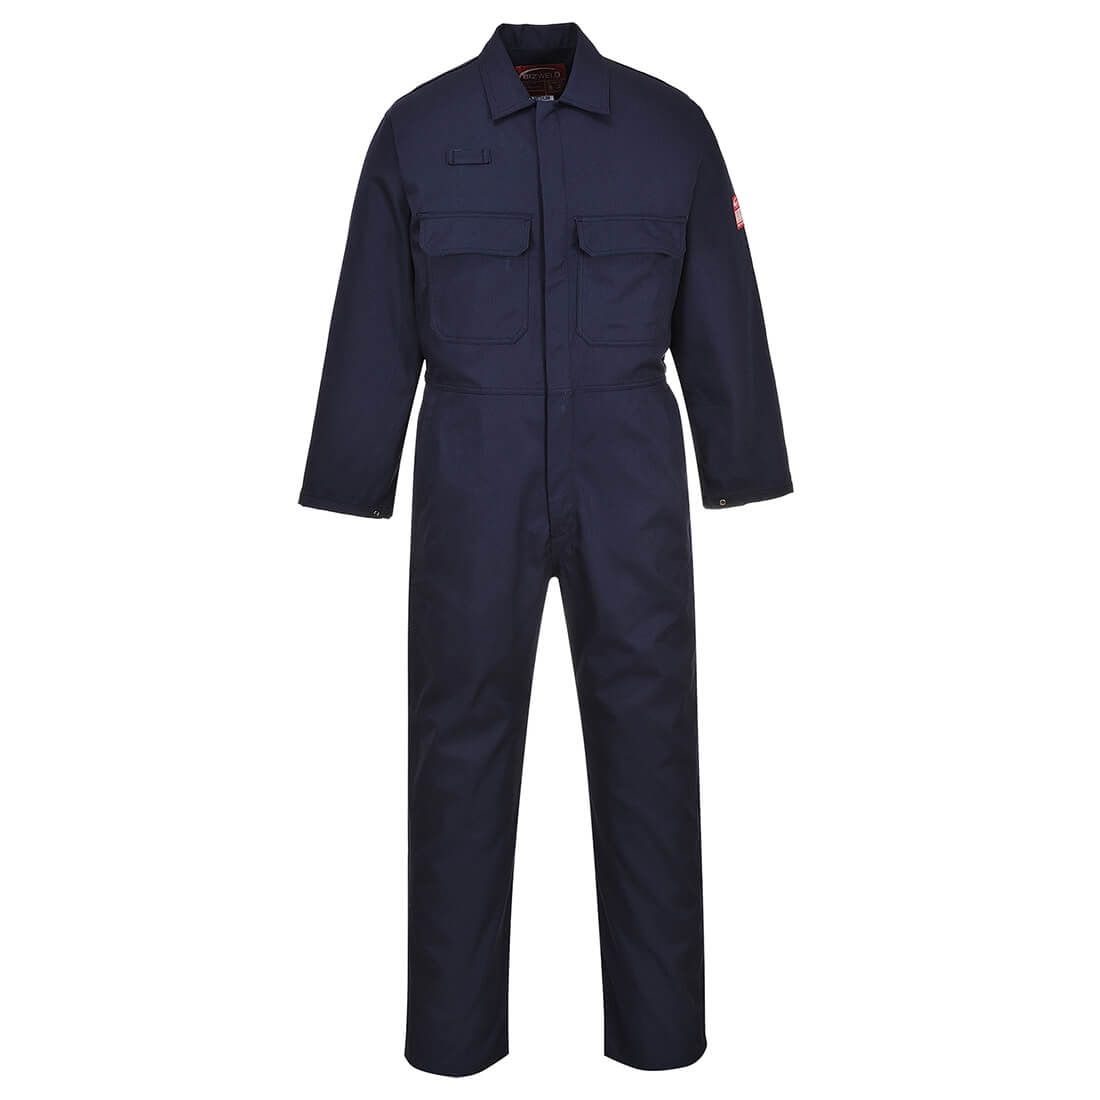 Image of Biz Weld Mens Flame Resistant Overall Navy Blue S 32"